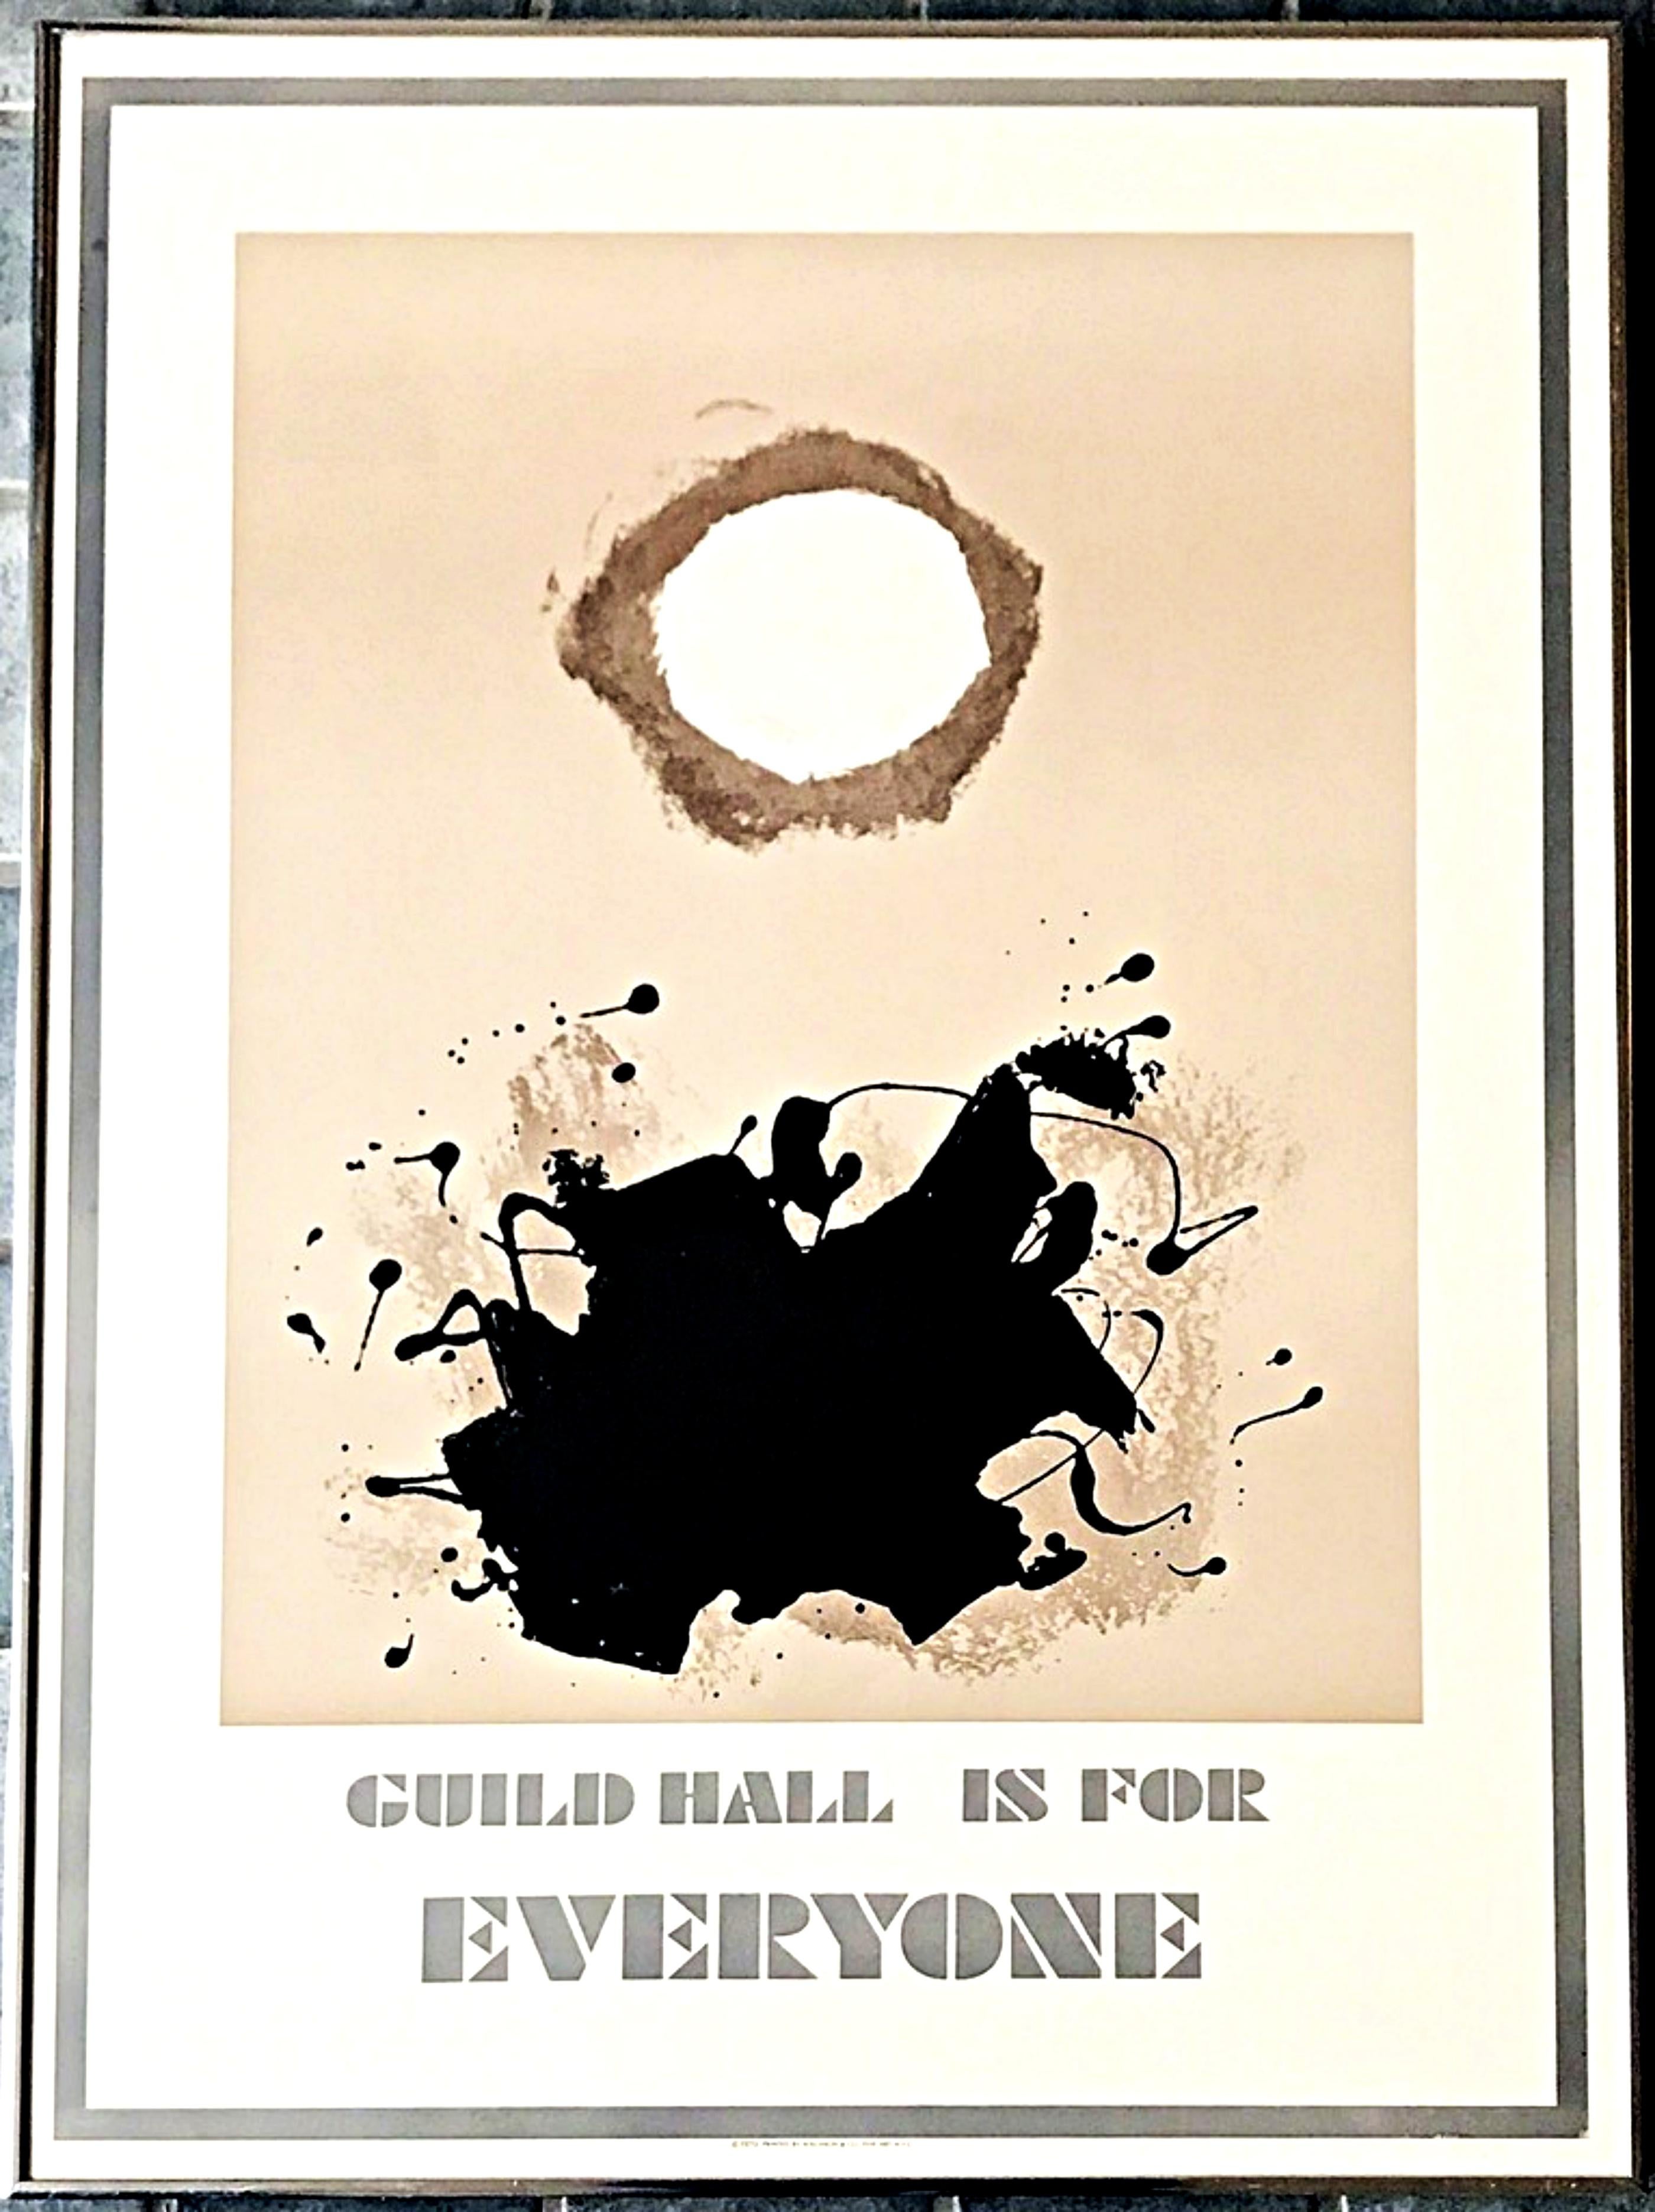 Adolph Gottlieb
Guild Hall is for Everyone, 1970
Vintage Offset Lithograph poster 
Vintage metal Frame included

Rare vintage, limited edition, offset lithograph poster. Donated by DLA Piper Law Firm to the Denver Art Museum. Deaccessioned from the